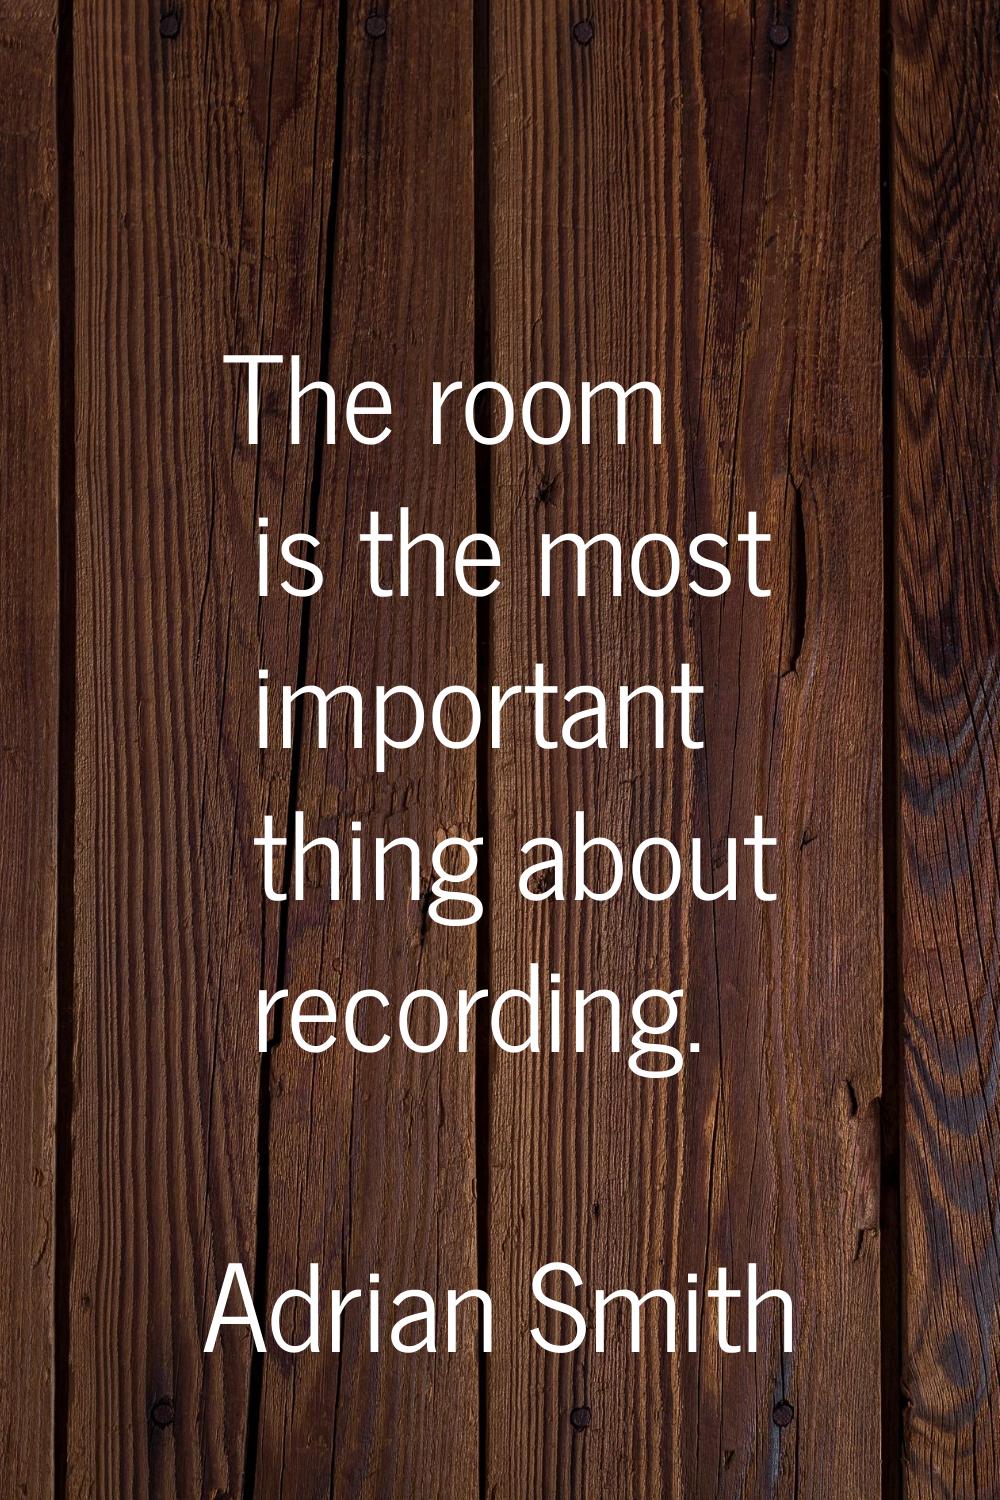 The room is the most important thing about recording.